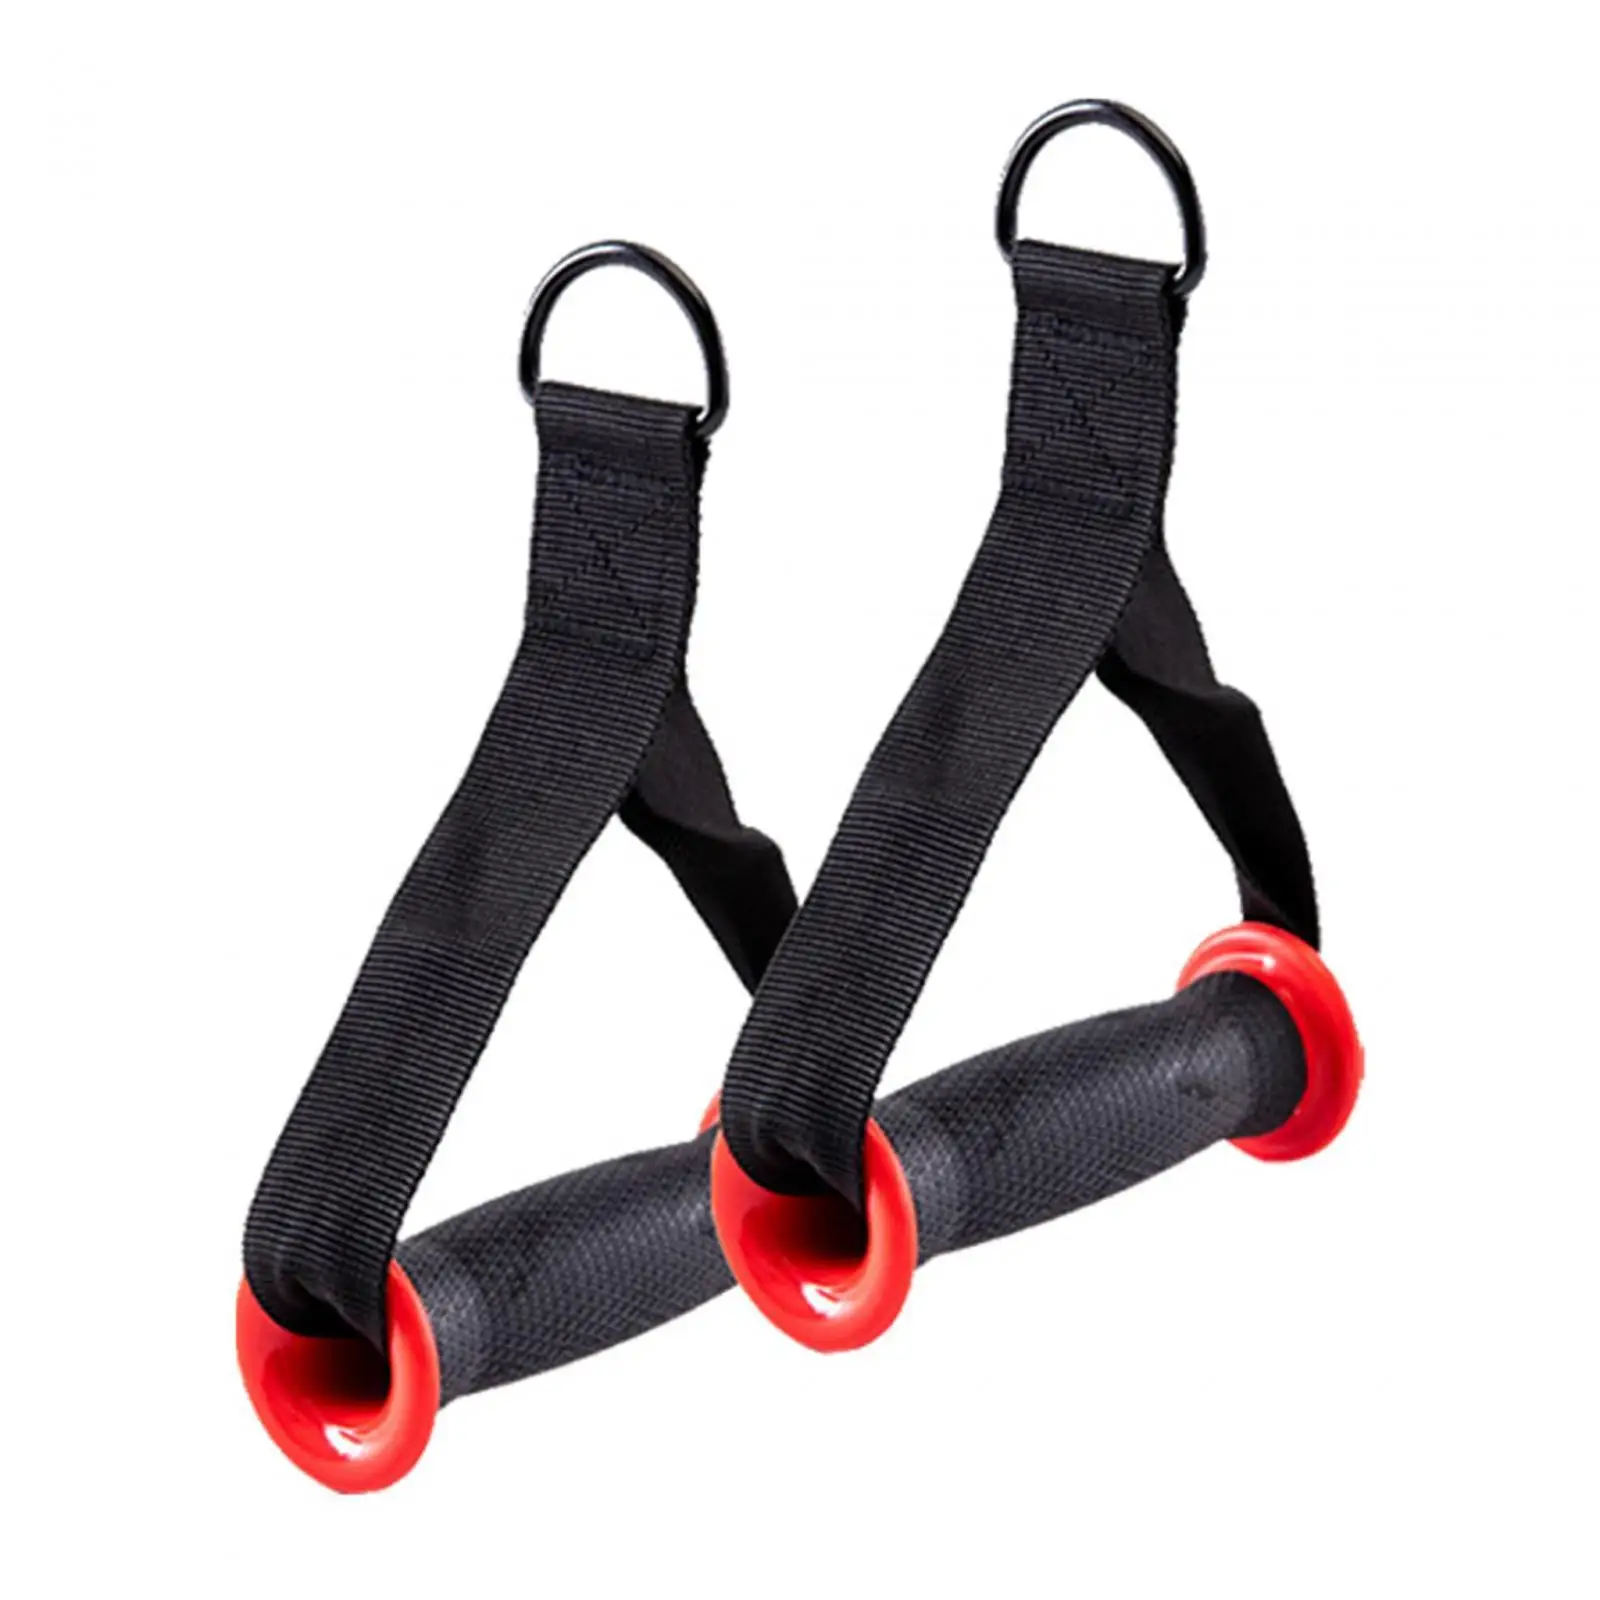 2 Pieces Gym Handle Body Fitness Exercise Equipment Multi Fitness Straps